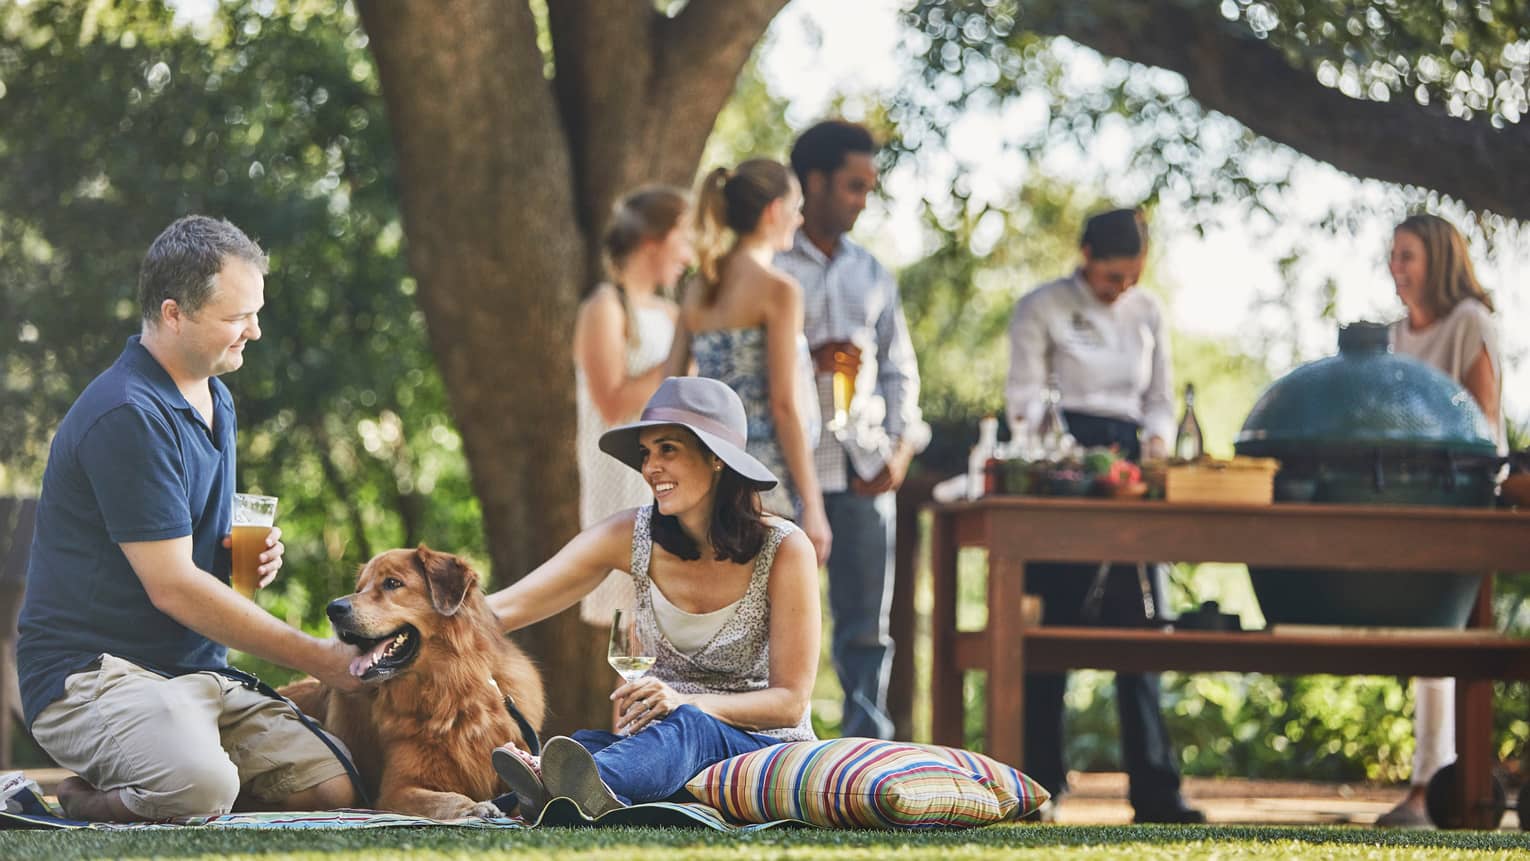 Man with beer, woman with wine sit on lawn, pet large dog, people around barbecue in background